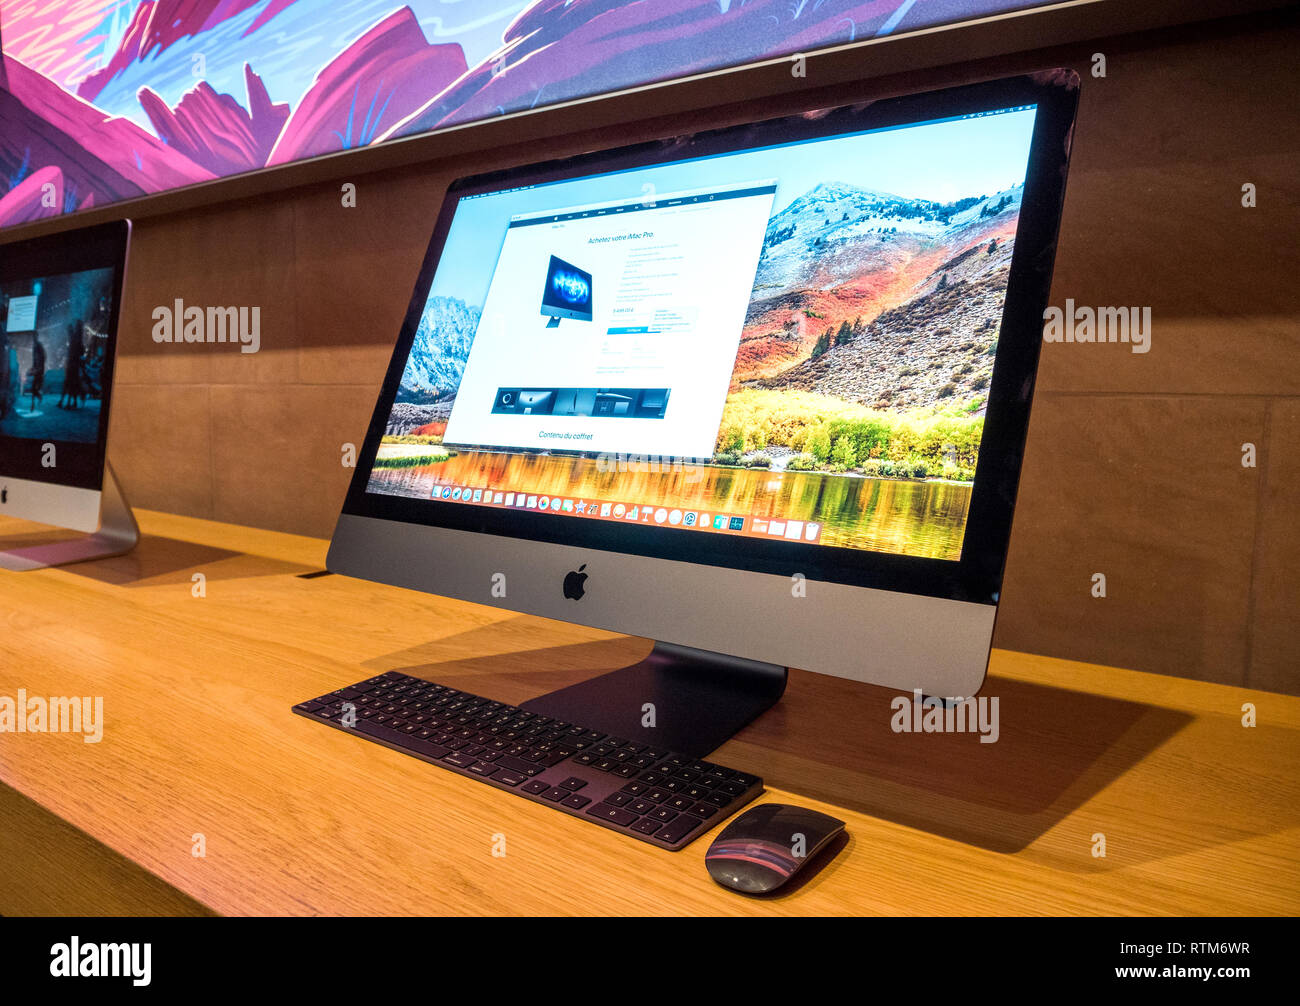 STRASBOURG, FRANCE - JAN 11, 2018: Side view of New iMac Pro the all-in-one  personal computer in Apple Computers Store. Apple claims the iMac Pro is  the most powerful Mac ever made